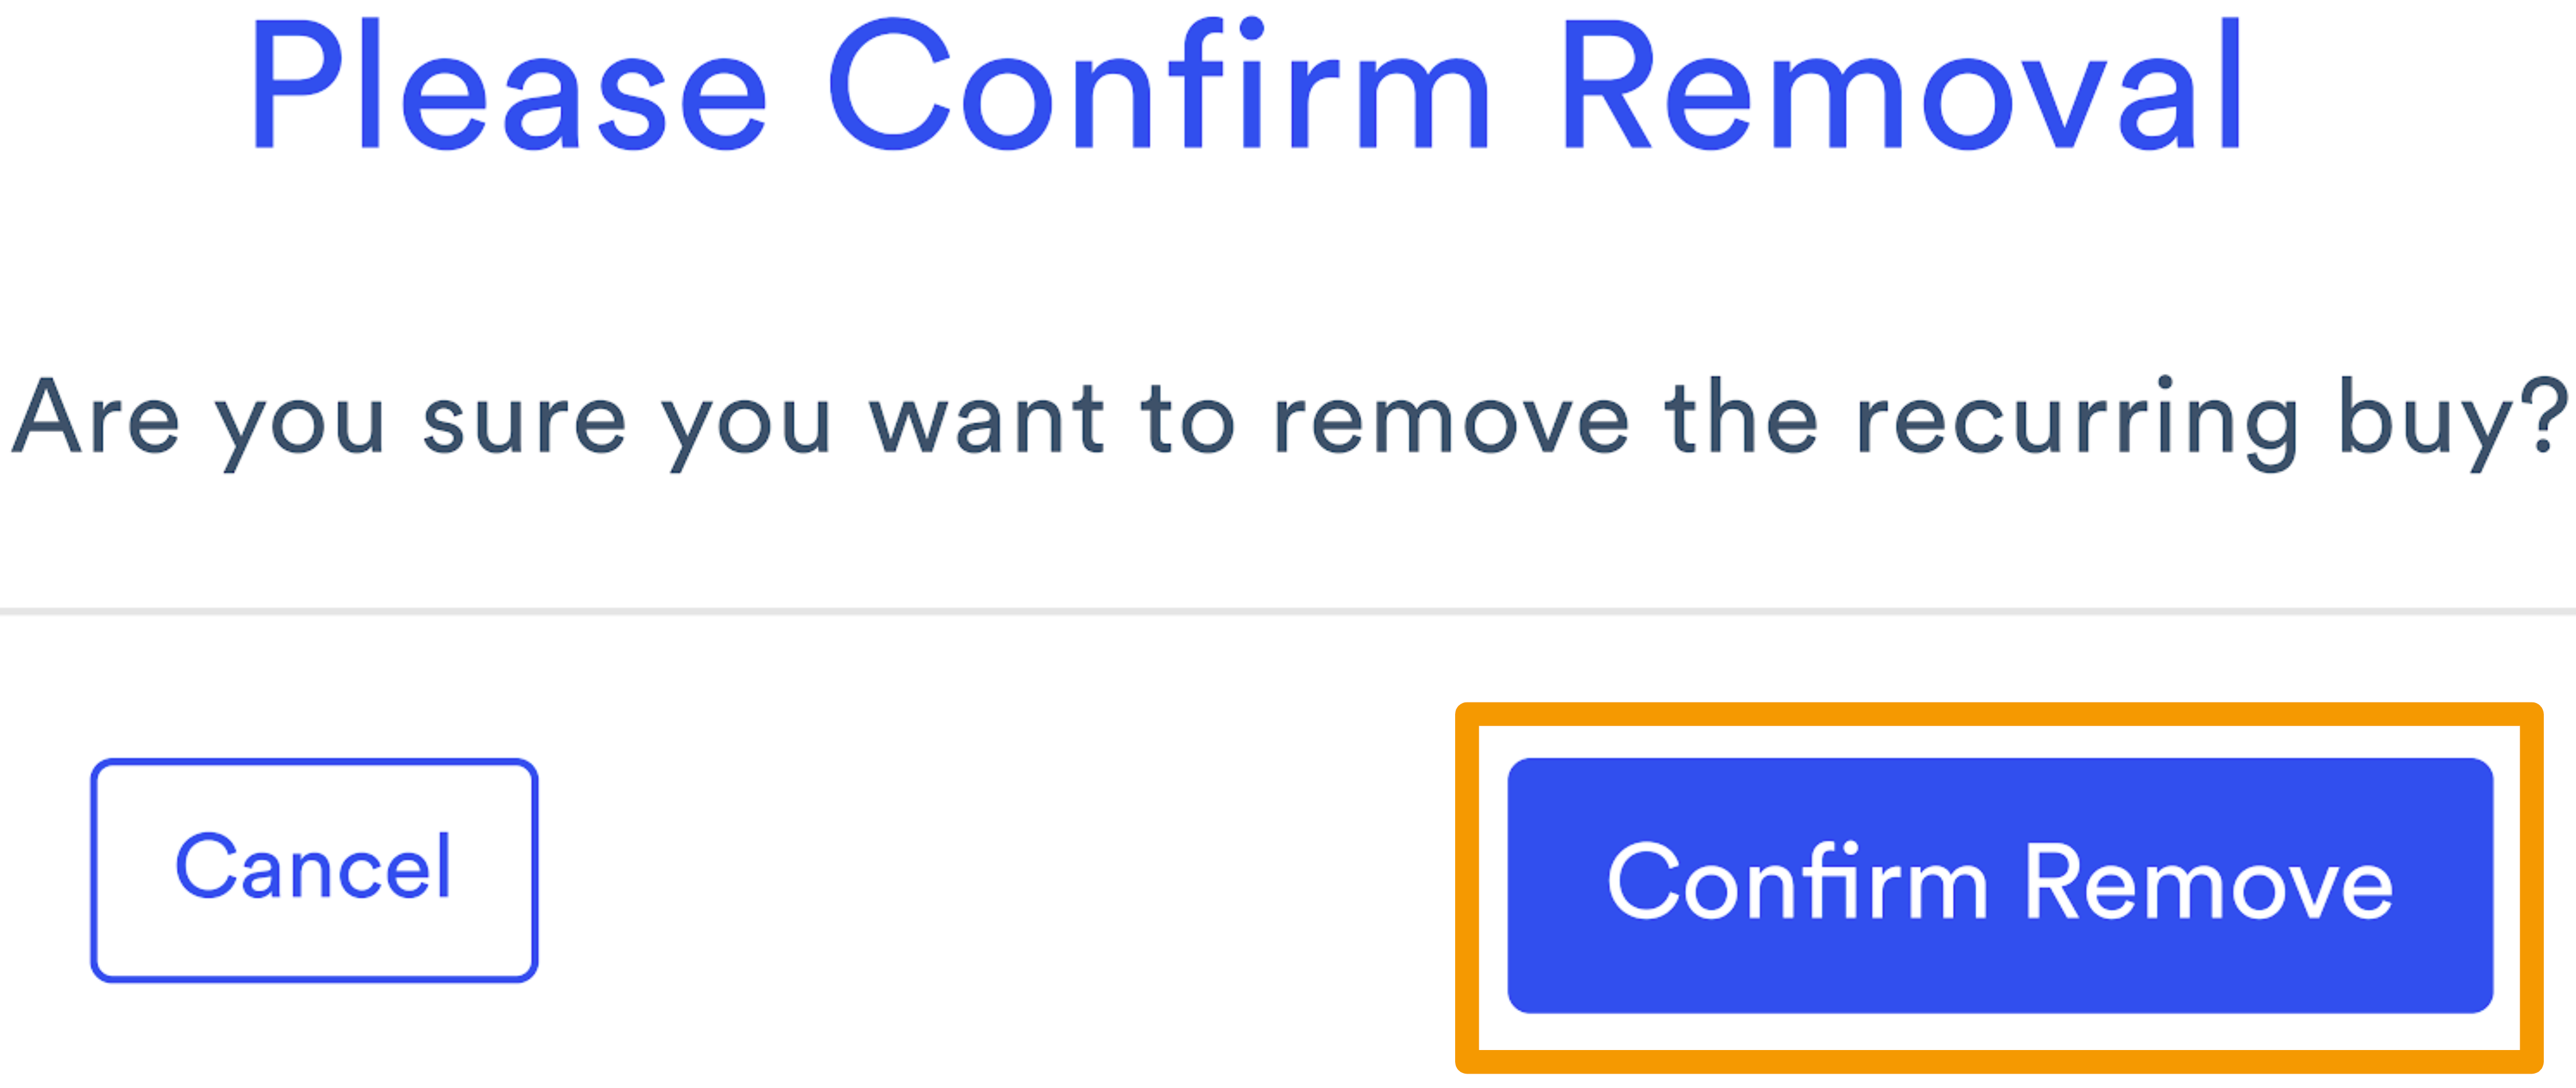 Confirm_Removal_v2.png